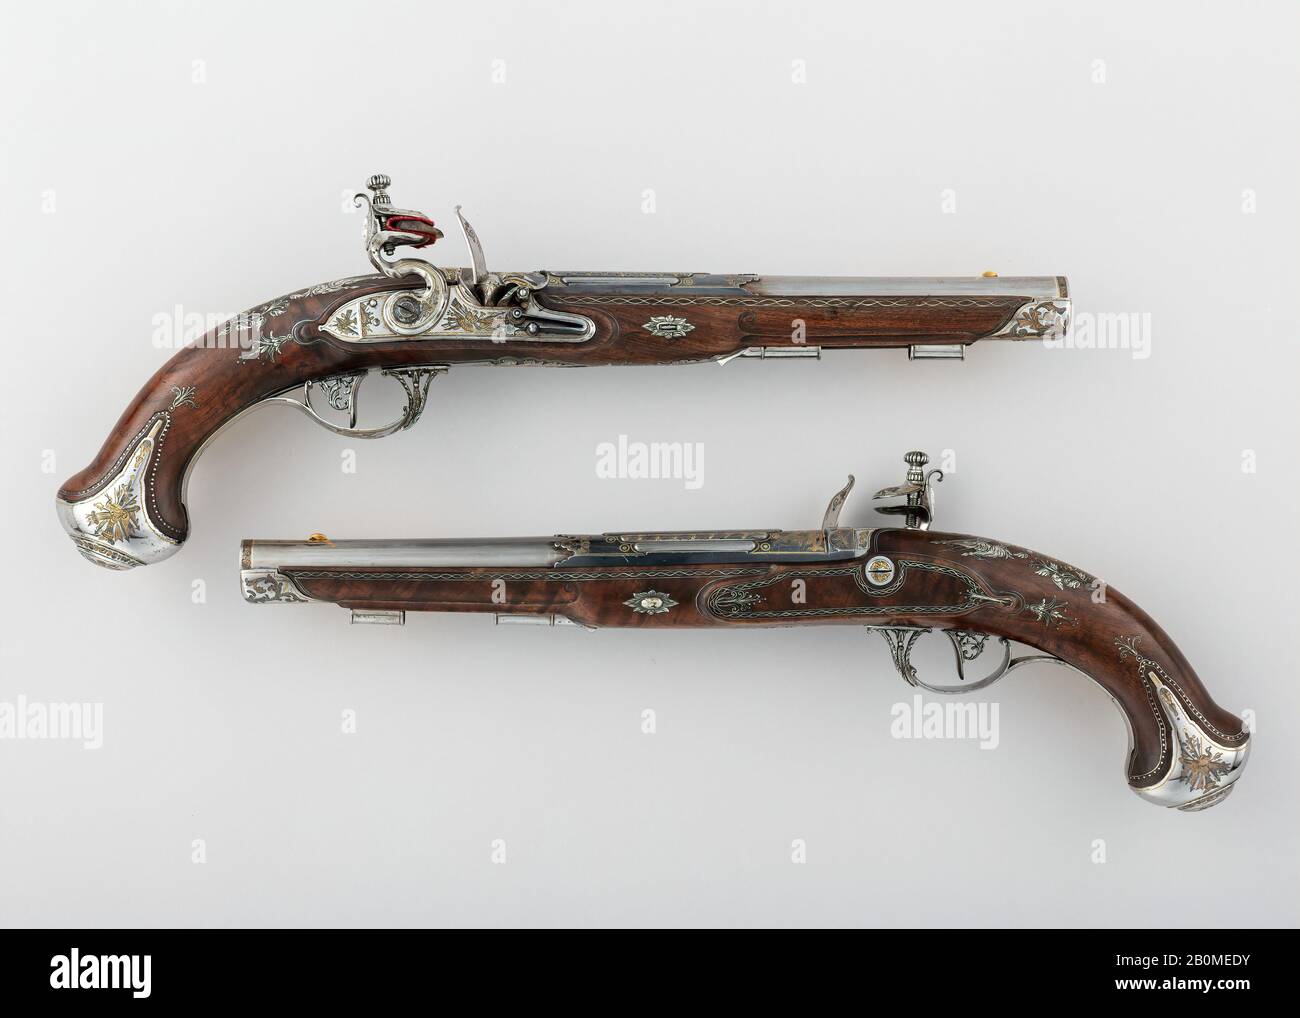 Tula Arms Factory, Pair of Flintlock Pistols made for Grand Duke Constantine Pavlovich of Russia (1779–1831), Russian, Tula, Tula Arms Factory (Russian, Tula, 1712–Present), ca. 1801, Tula, Russian, Tula, Steel, silver, gold, wood, L. of each pistol 15 ¼ in. (38.8 cm); L. of each barrel 9 3/16 in. (23.3 cm); Cal. of each barrel 9/16 in. (15 mm); Wt. of pistol (a) 1 lb. 13 oz. (821 g); Wt. of pistol (b) 1 lb. 14 oz. (845 g), Firearms-Pistols-Flintlock Stock Photo